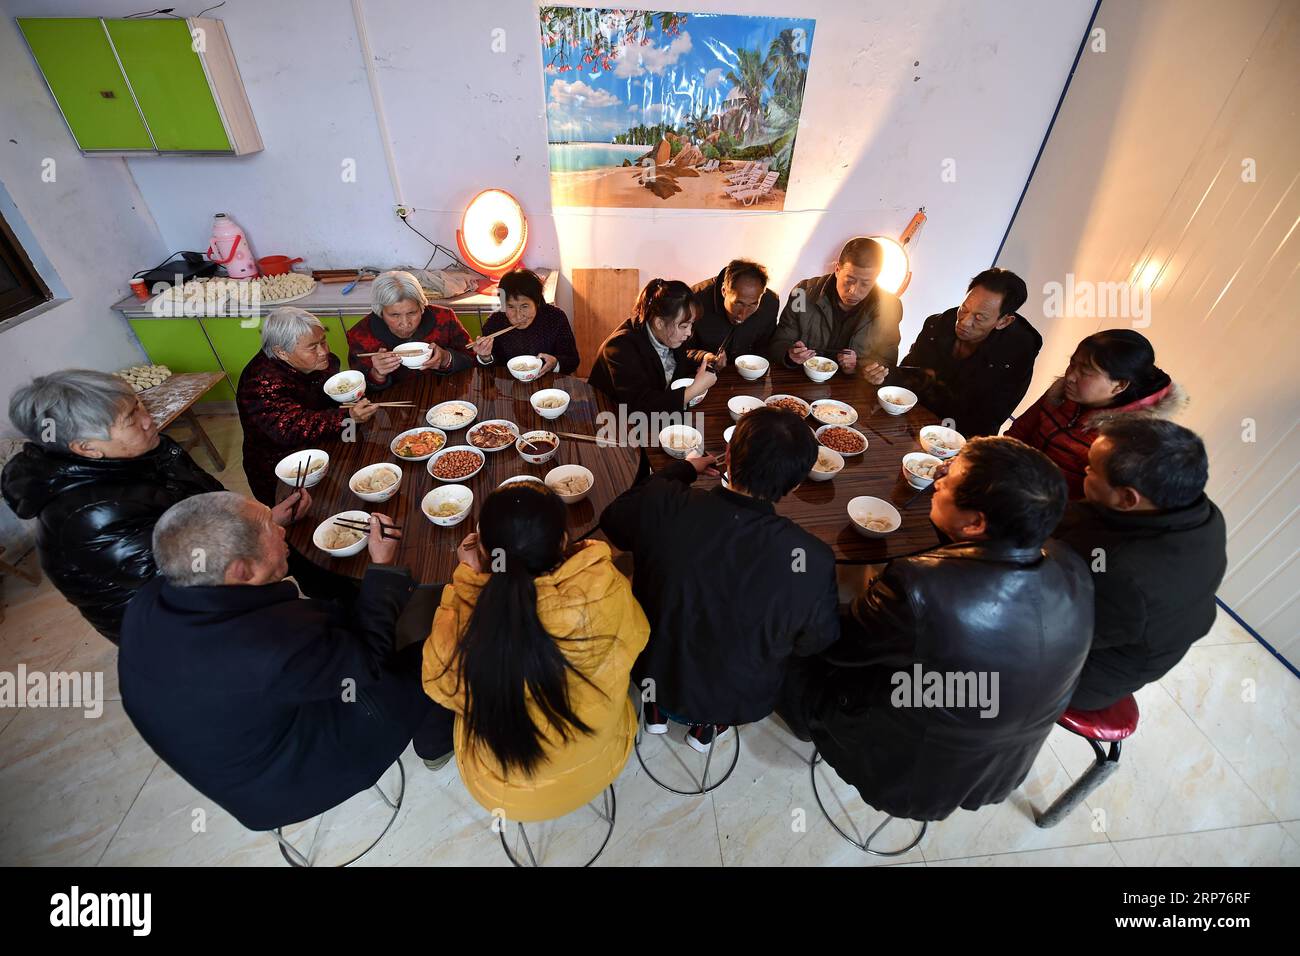 (190129) -- WENXI COUNTY, Jan. 29, 2019 (Xinhua) -- Residents of the Home of Happiness poverty-alleviation settlement have a meal together in Zhangcailing Village of Yangyu Township, Wenxi County, north China s Shanxi Province, Jan. 28, 2019. For generations, residents of Zhangcailing Village barely scraped a living as a result of geographical isolation, poor infrastructure and lack of supporting industries. To help pull villagers out of poverty, the government increased its financial support encouraging agriculture and husbandry suited to the local conditions. By planting Sichuan pepper, a sp Stock Photo